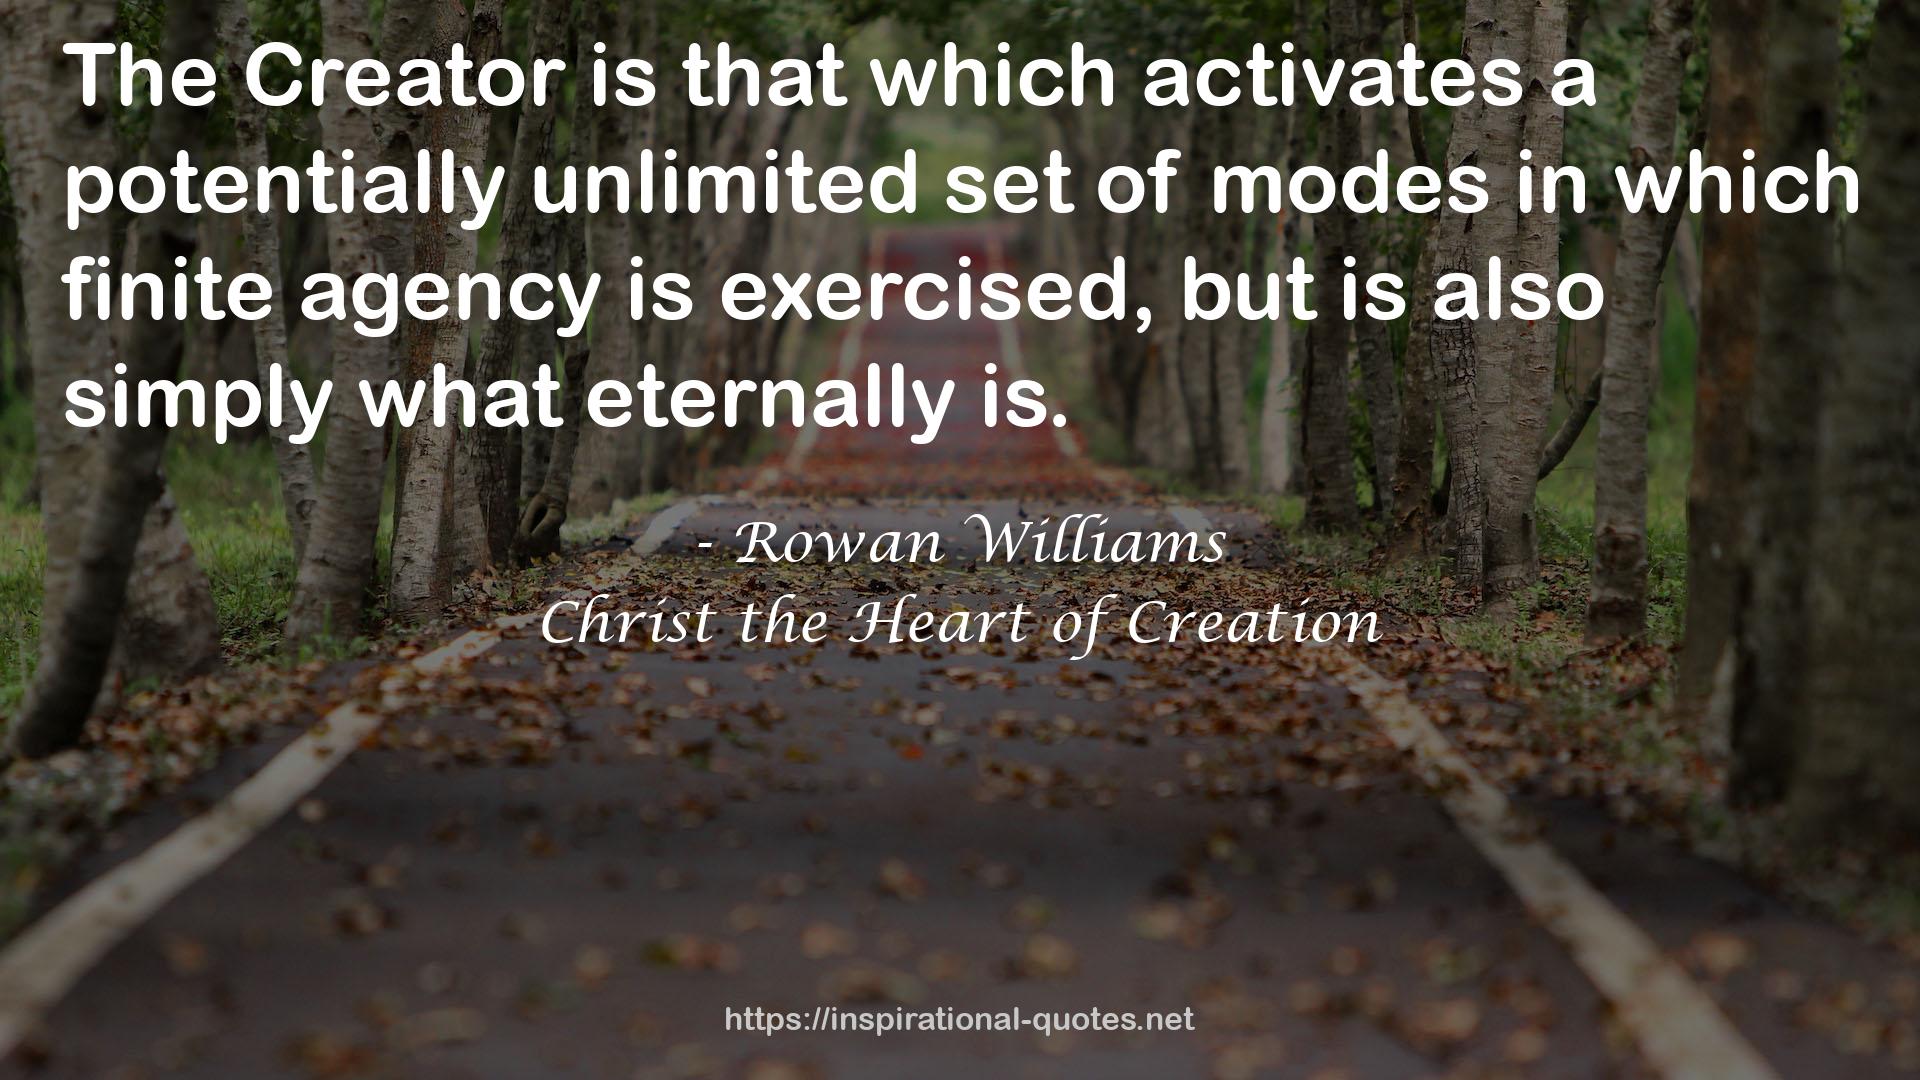 Christ the Heart of Creation QUOTES